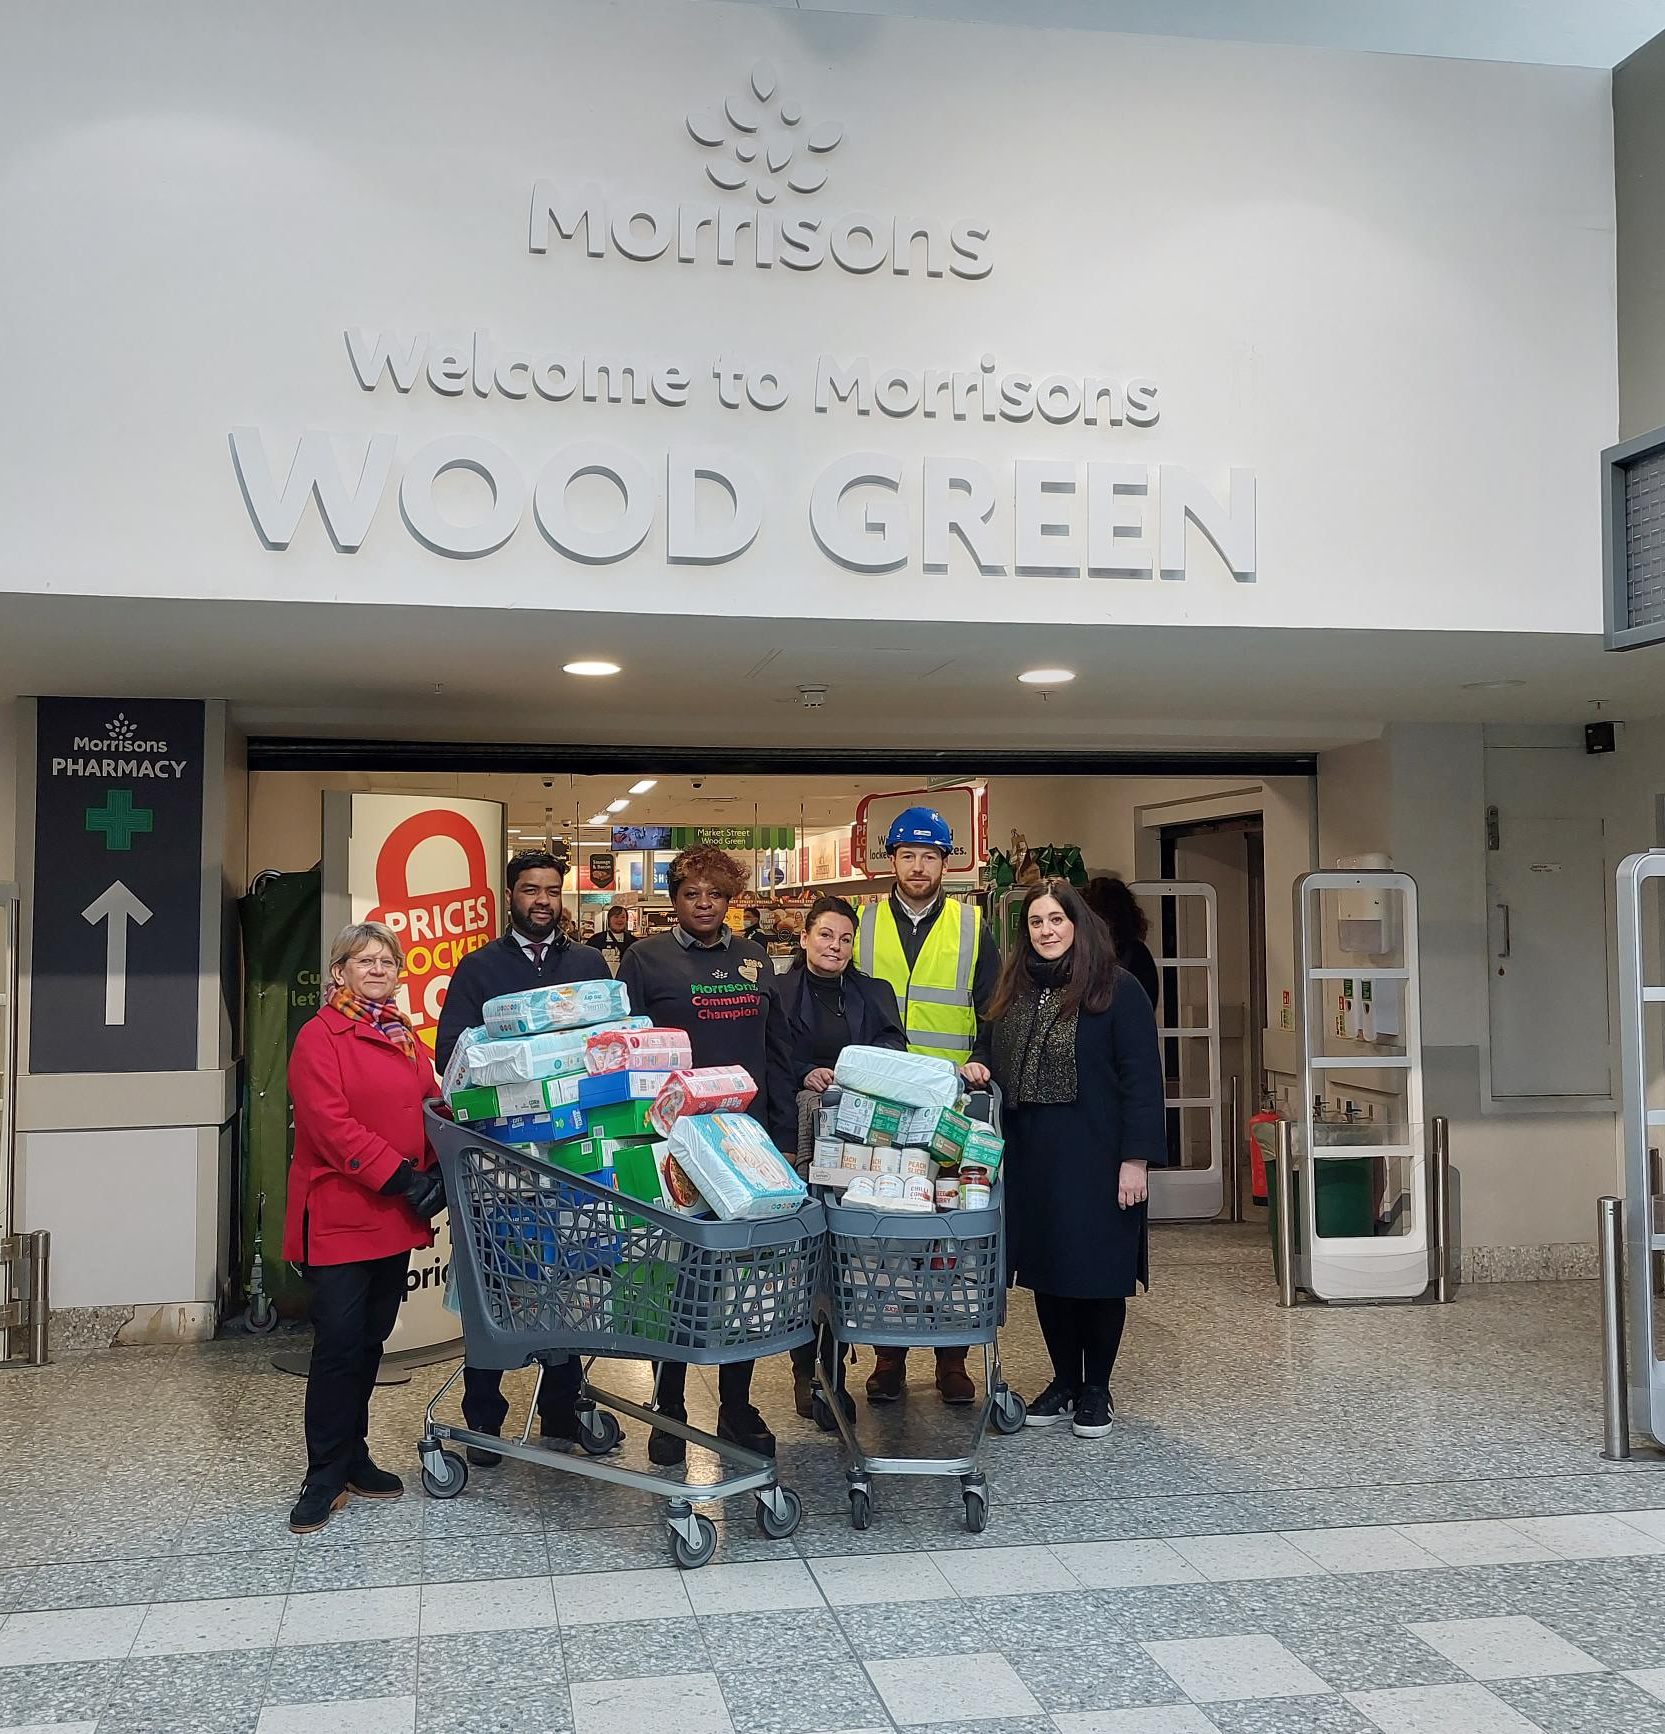 Leader of the council Cllr Peray Ahmet and Cabinet Member for housing delivery Cllr Ruth Gordon joined Formation Design and Build at our local Morrisons store in Wood Green to fill up trollies for a local food bank in Tottenham.